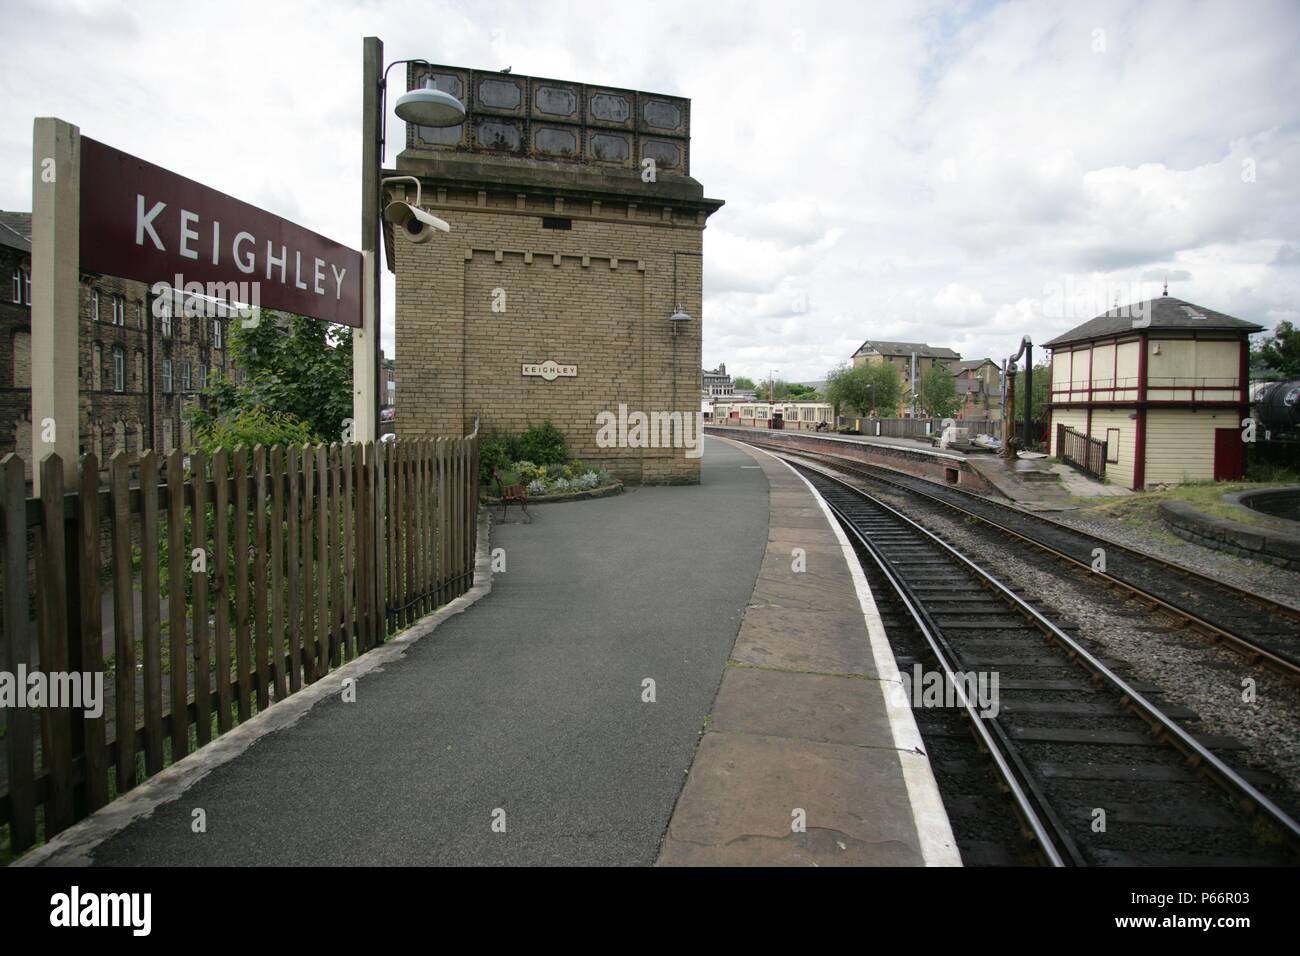 Heritage water tower, signal box and signage at Keighley station on the Keighley and Worth Valley railway Yorkshire. 2007 Stock Photo